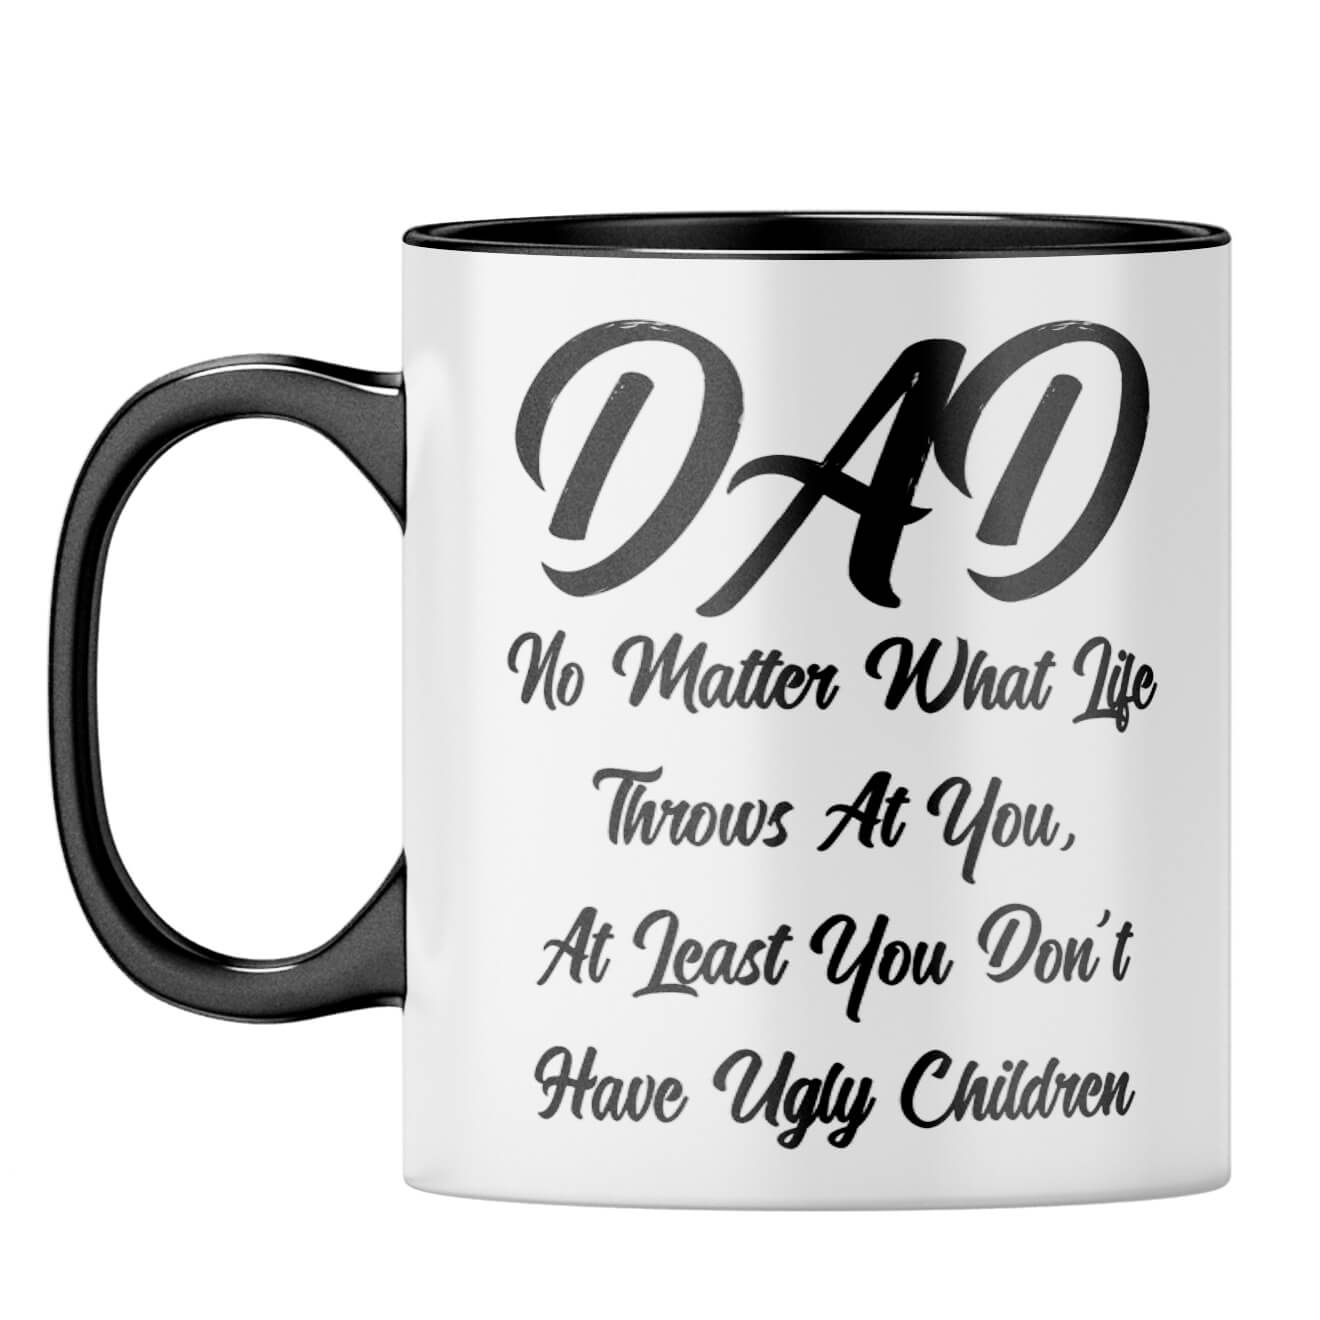 Dad Doesn't Have Ugly Children Coffee Mug Black